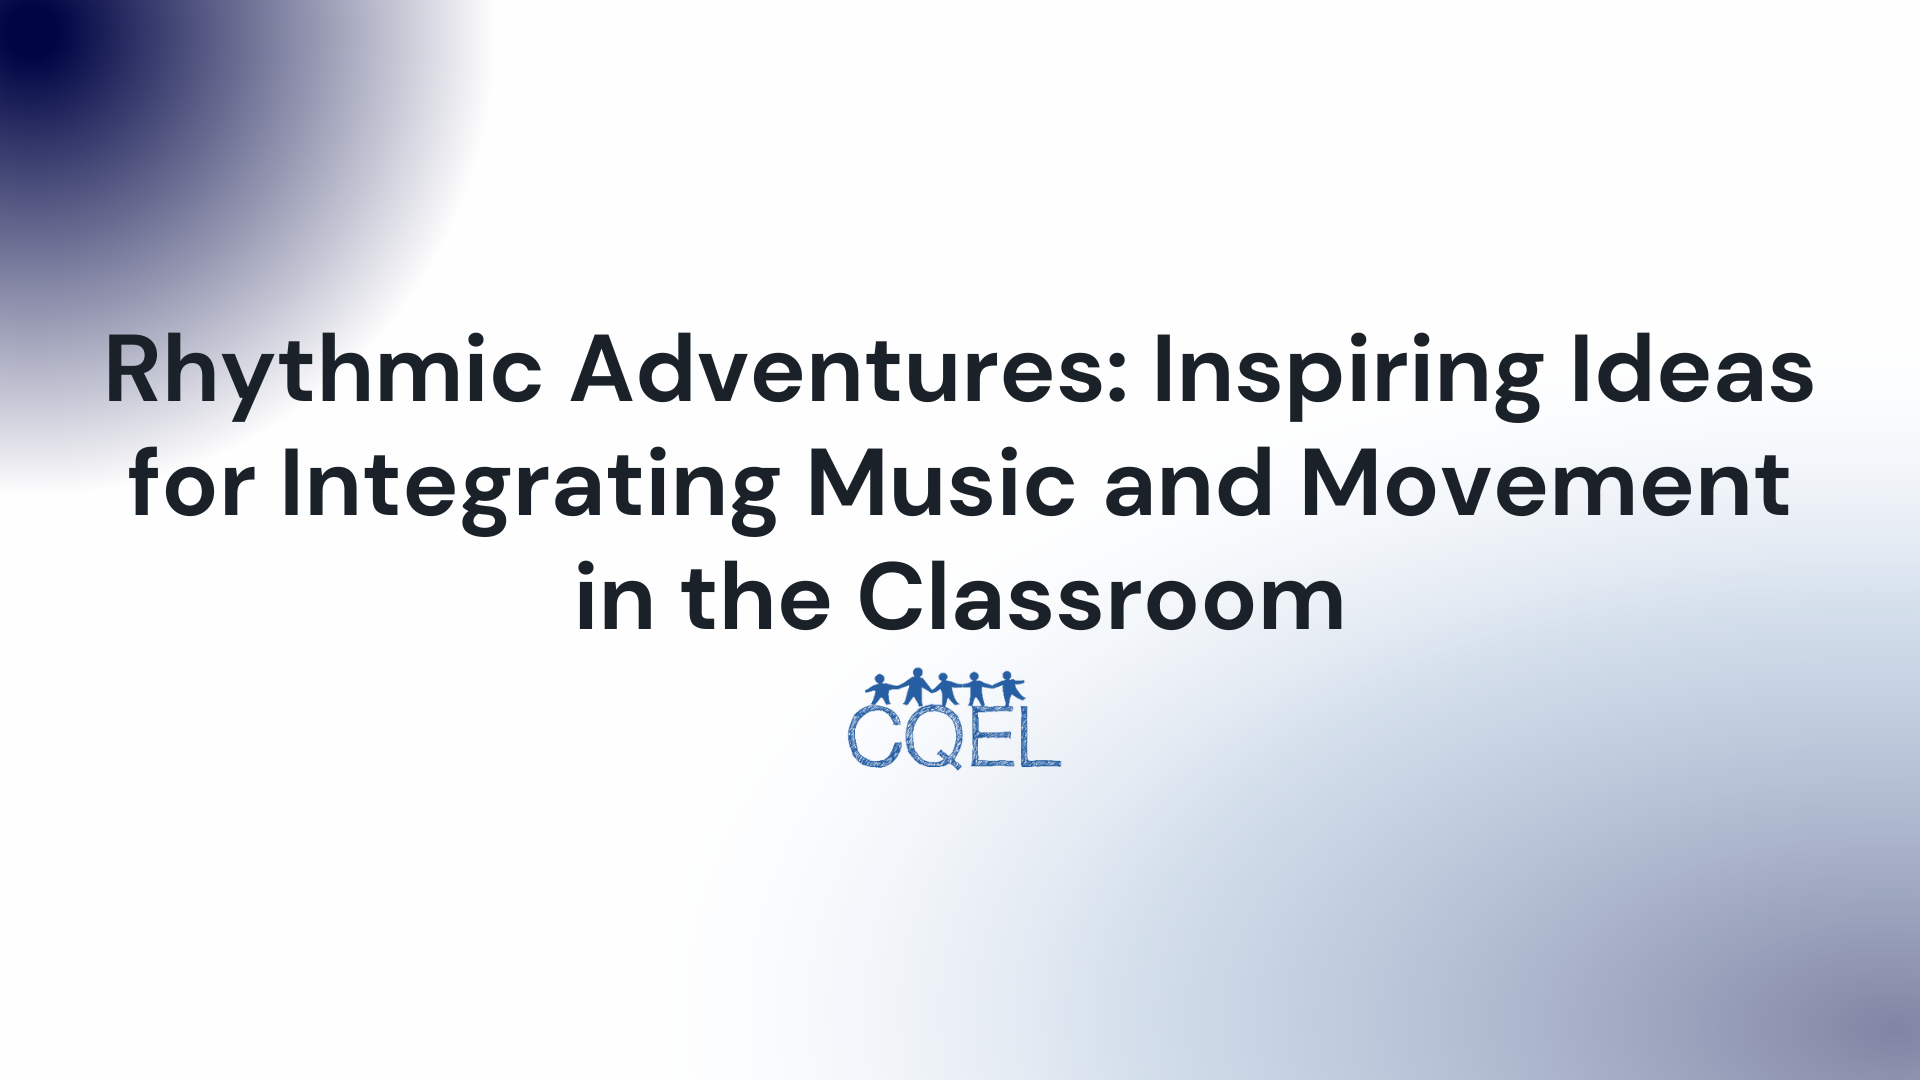 Rhythmic Adventures: Inspiring Ideas for Integrating Music and Movement in the Classroom